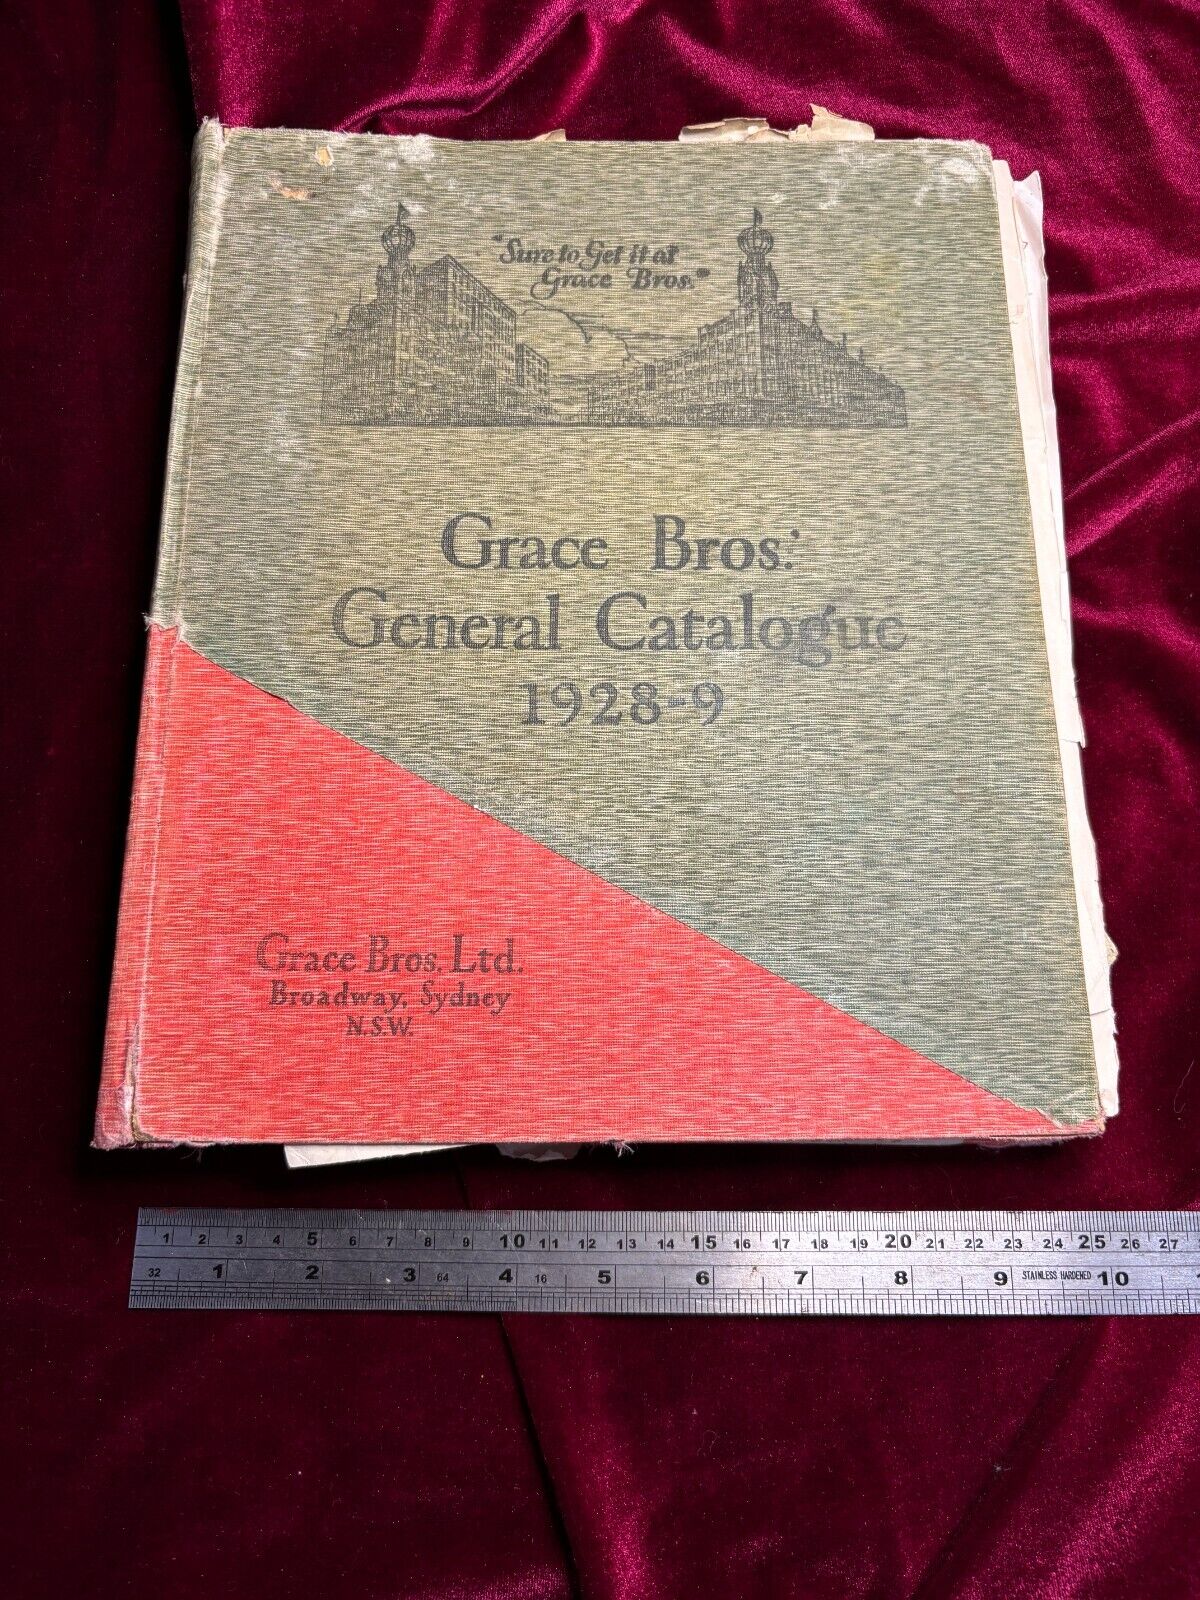 Vintage Grace Brothers general catalogue from 1928-1929, Sydney, Australia